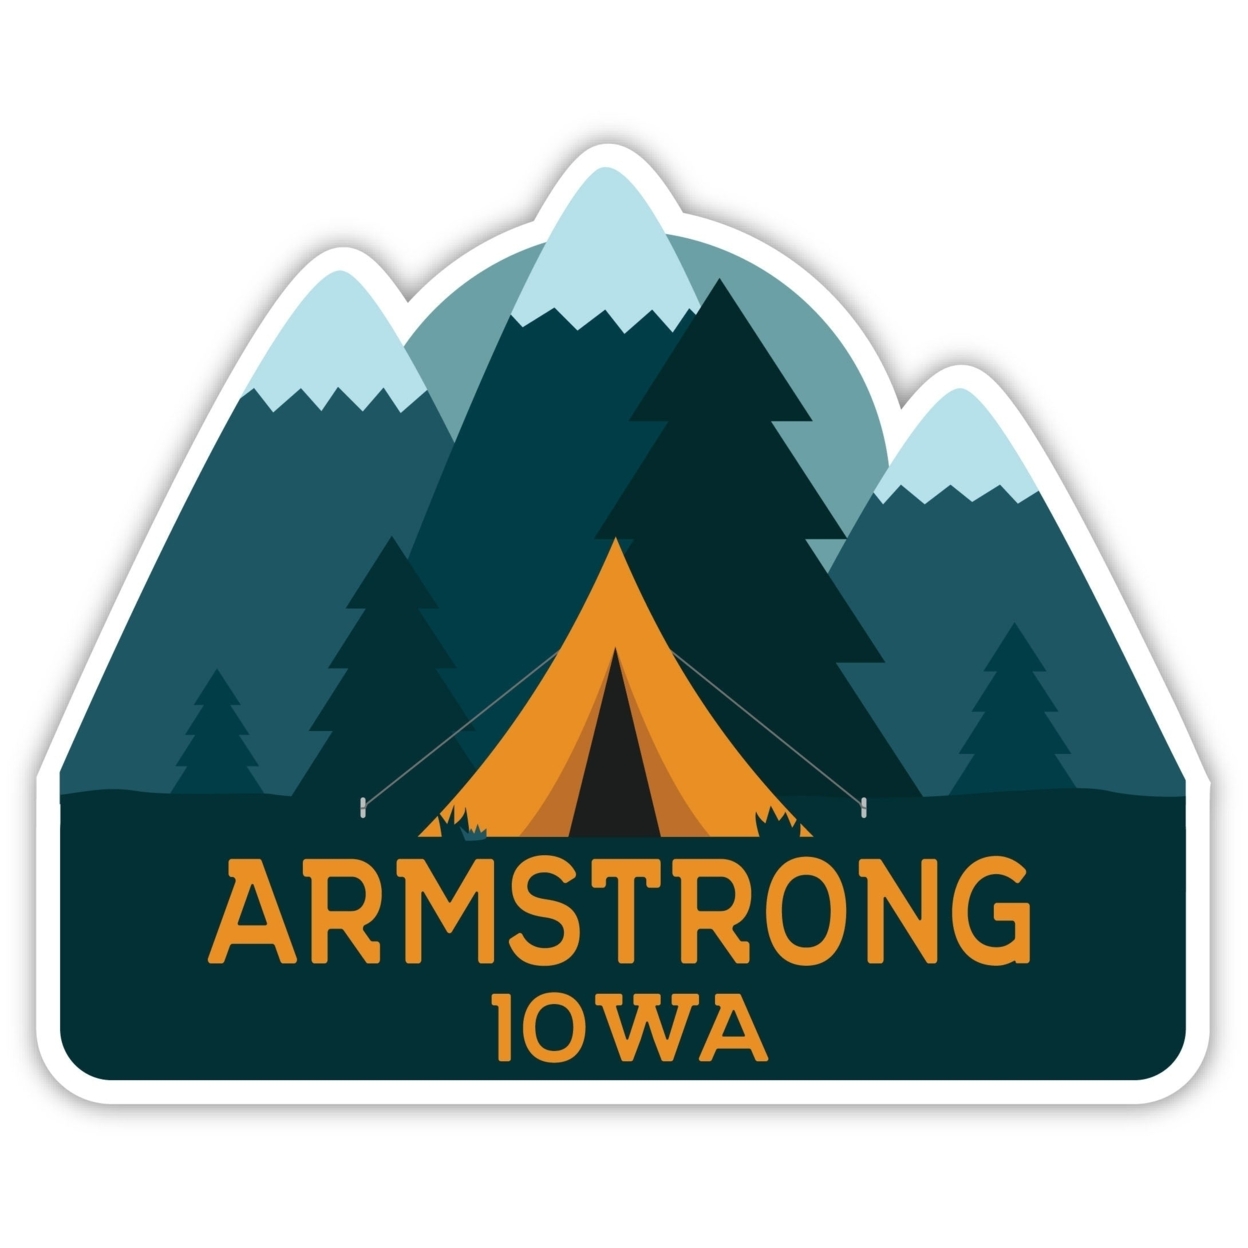 Armstrong Iowa Souvenir Decorative Stickers (Choose Theme And Size) - Single Unit, 8-Inch, Tent